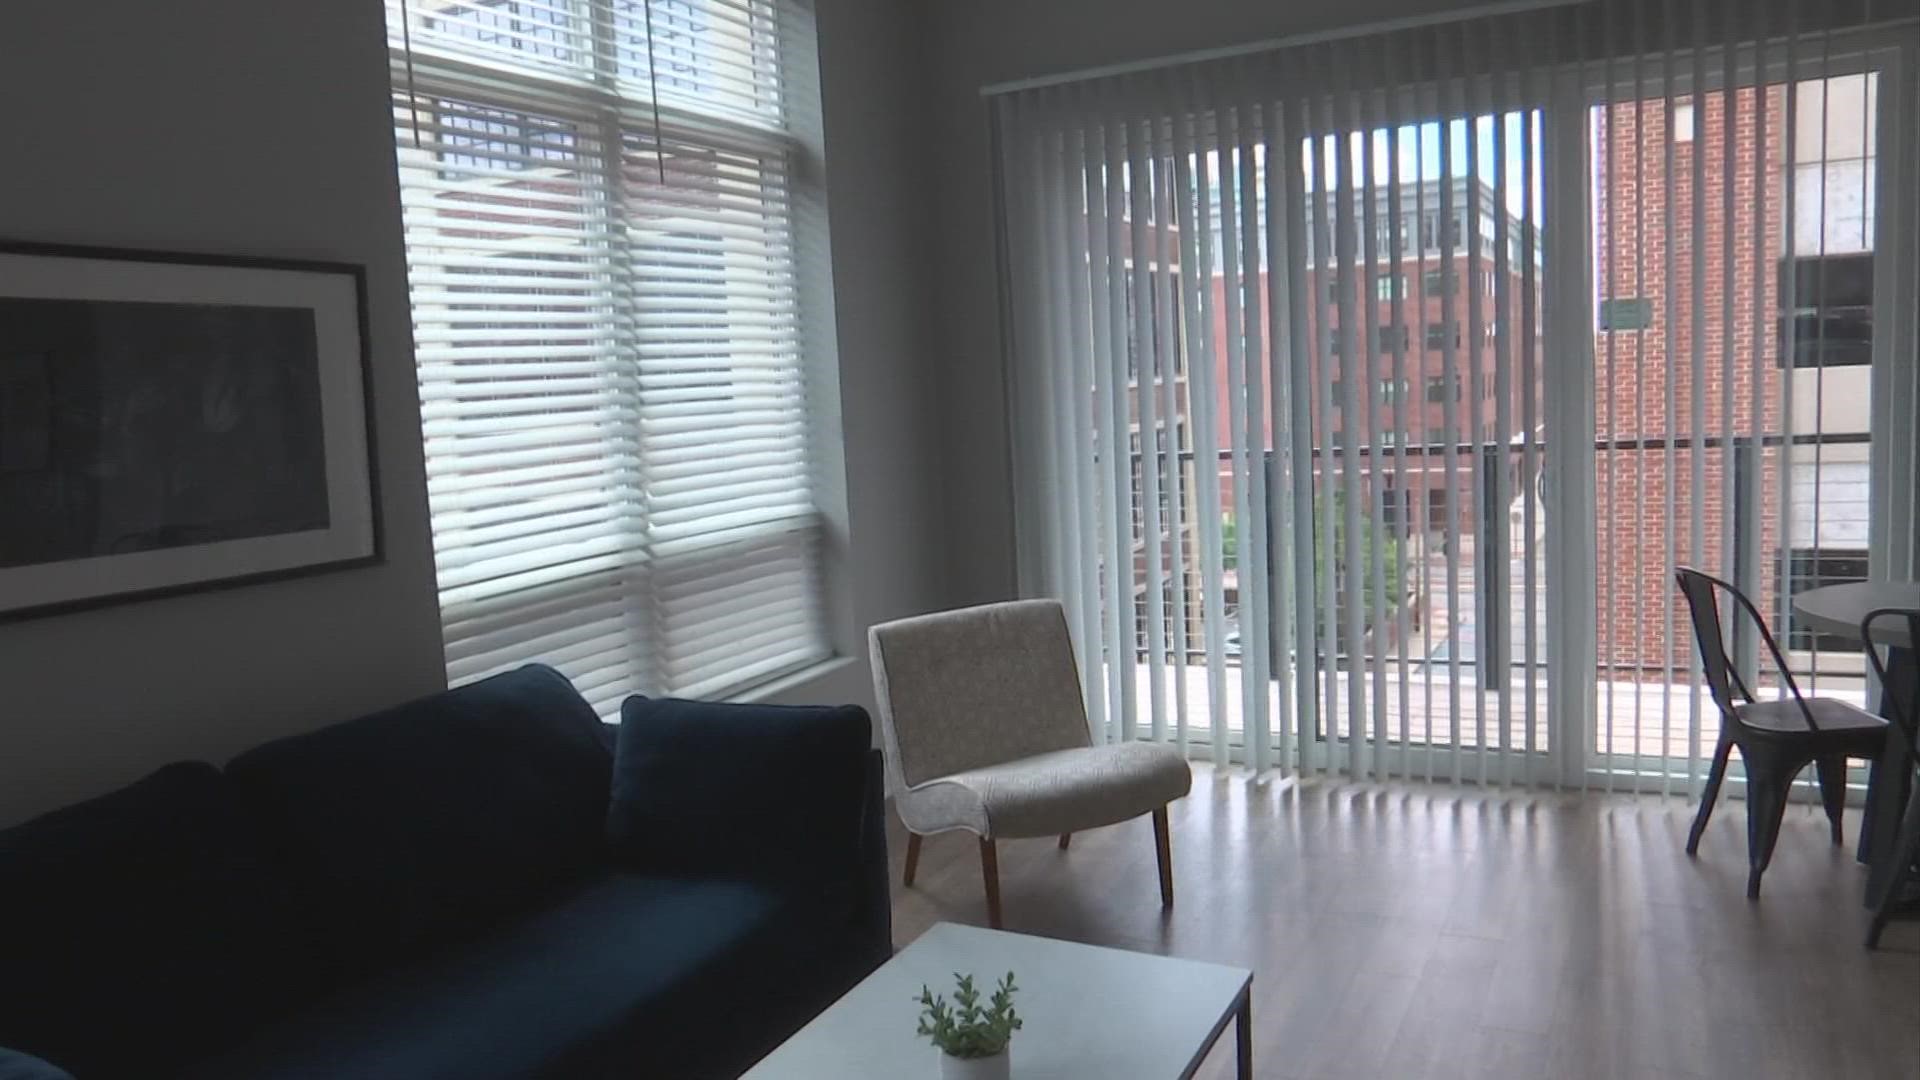 Columbus sits at the top for most nights booked on Airbnb. 10TV's Kiona Dyches spoke to an Airbnb host ahead of the upcoming Labor Day weekend.